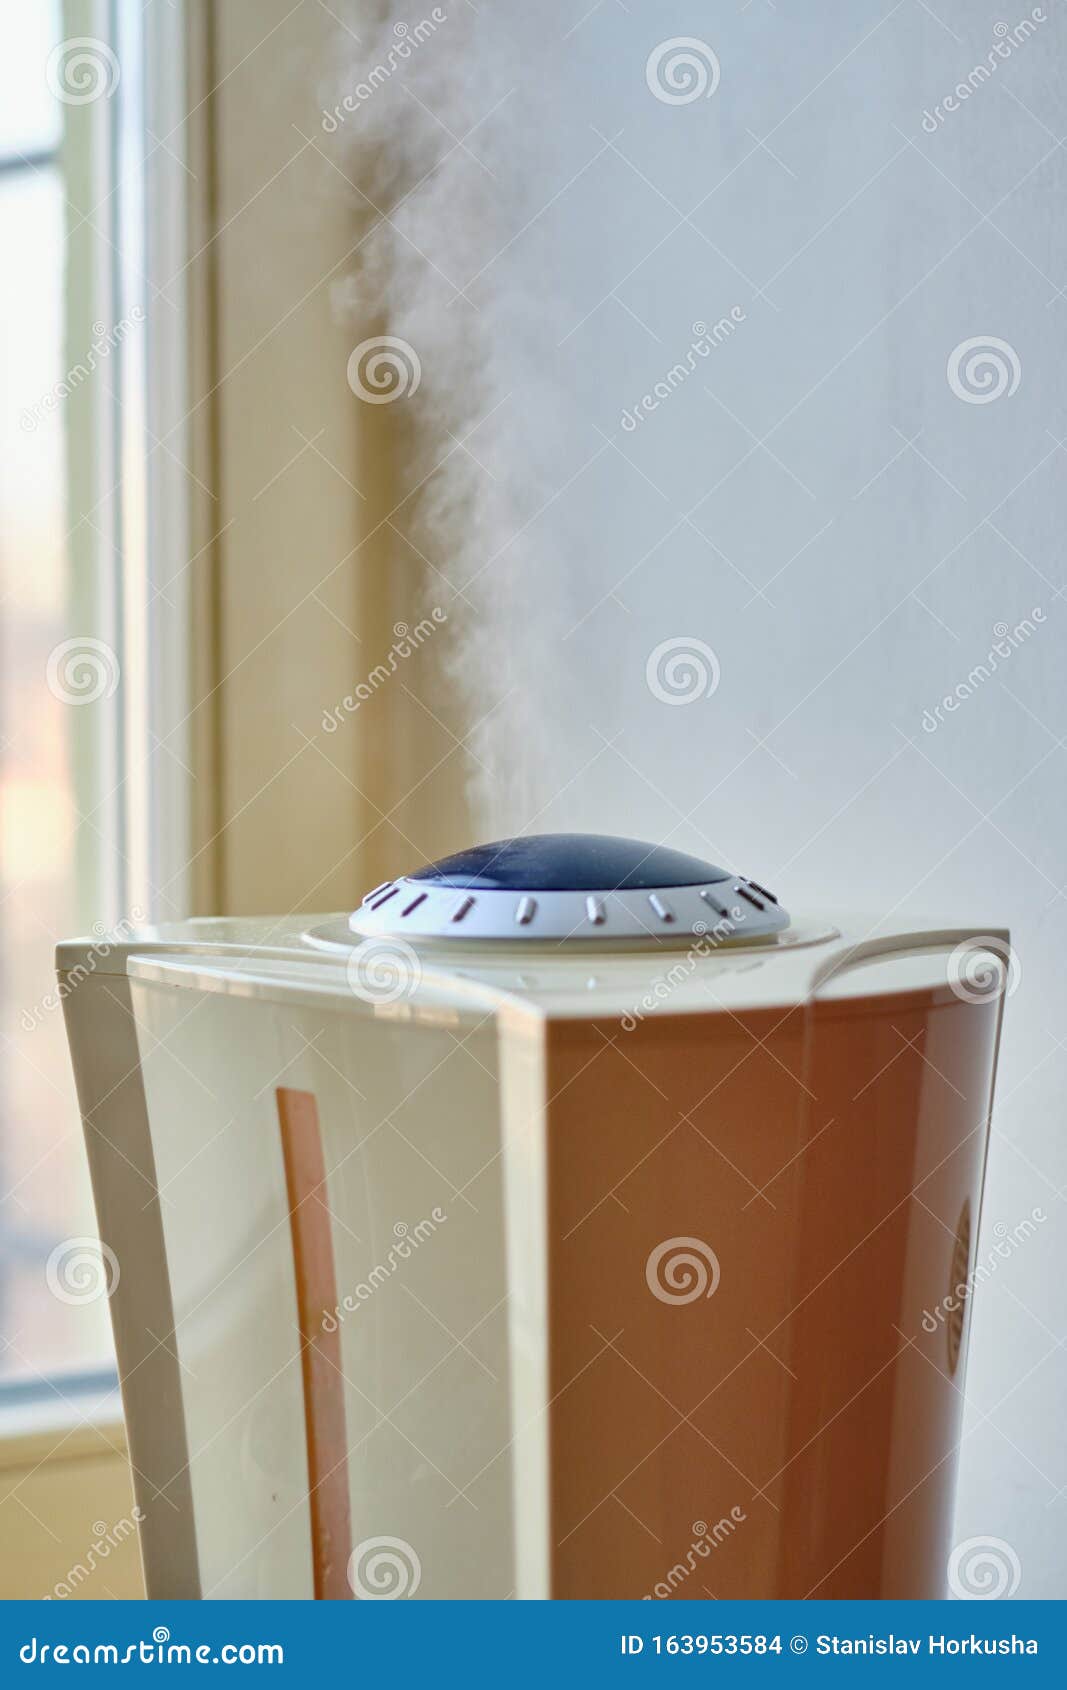 close-up view of the humidifier working in the room